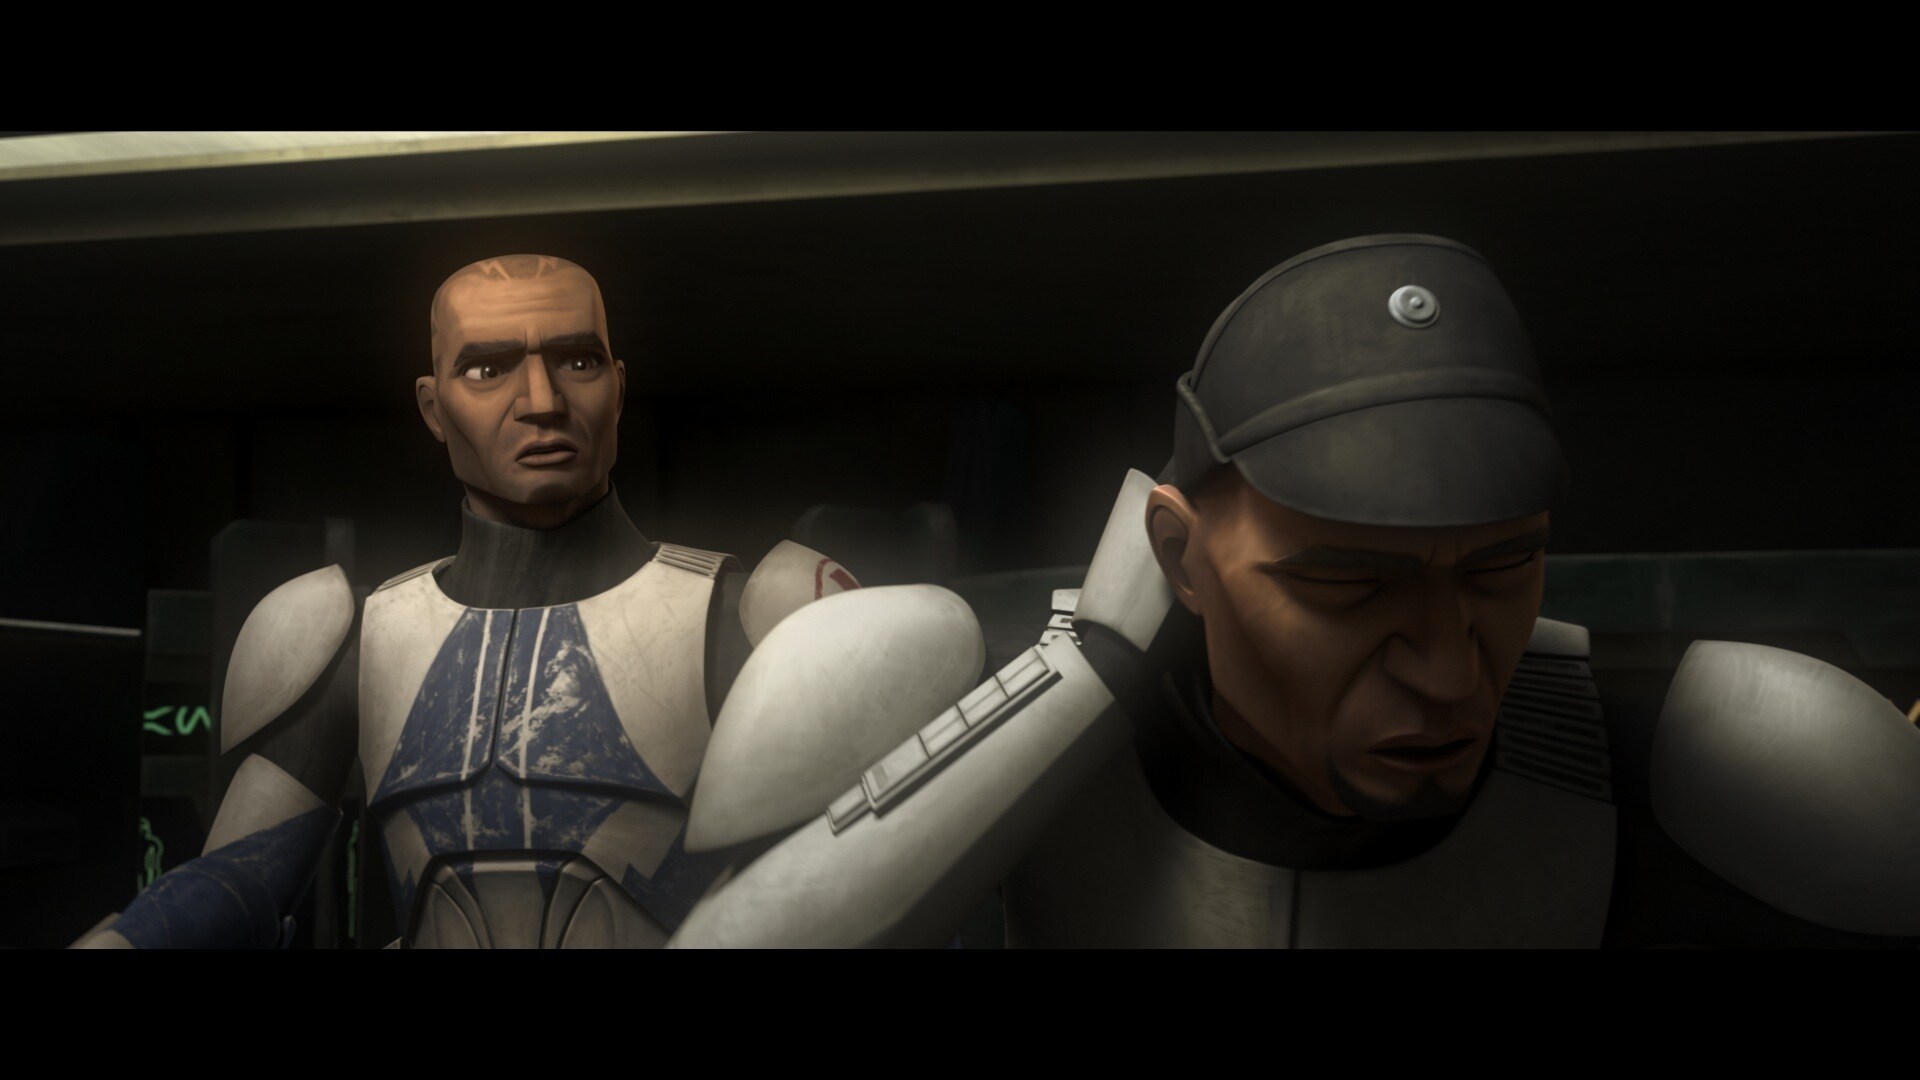 Kix is surprised to see Fives -- word has spread that Fives tried to assassinate the Chancellor a...